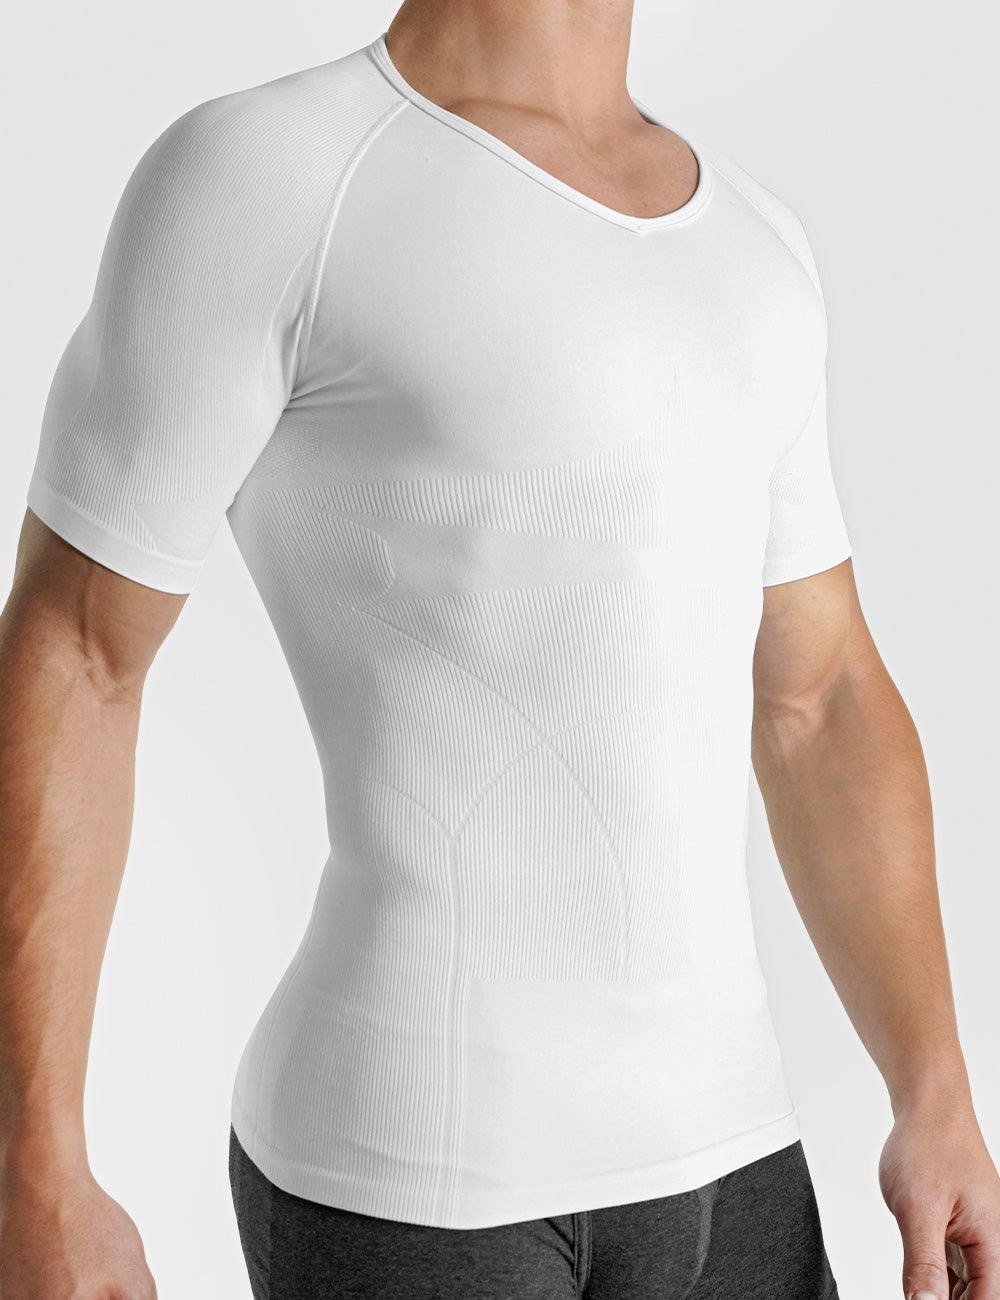 A400 Short Sleeve Compression Top // Gold (XS) - SKINS - Touch of Modern